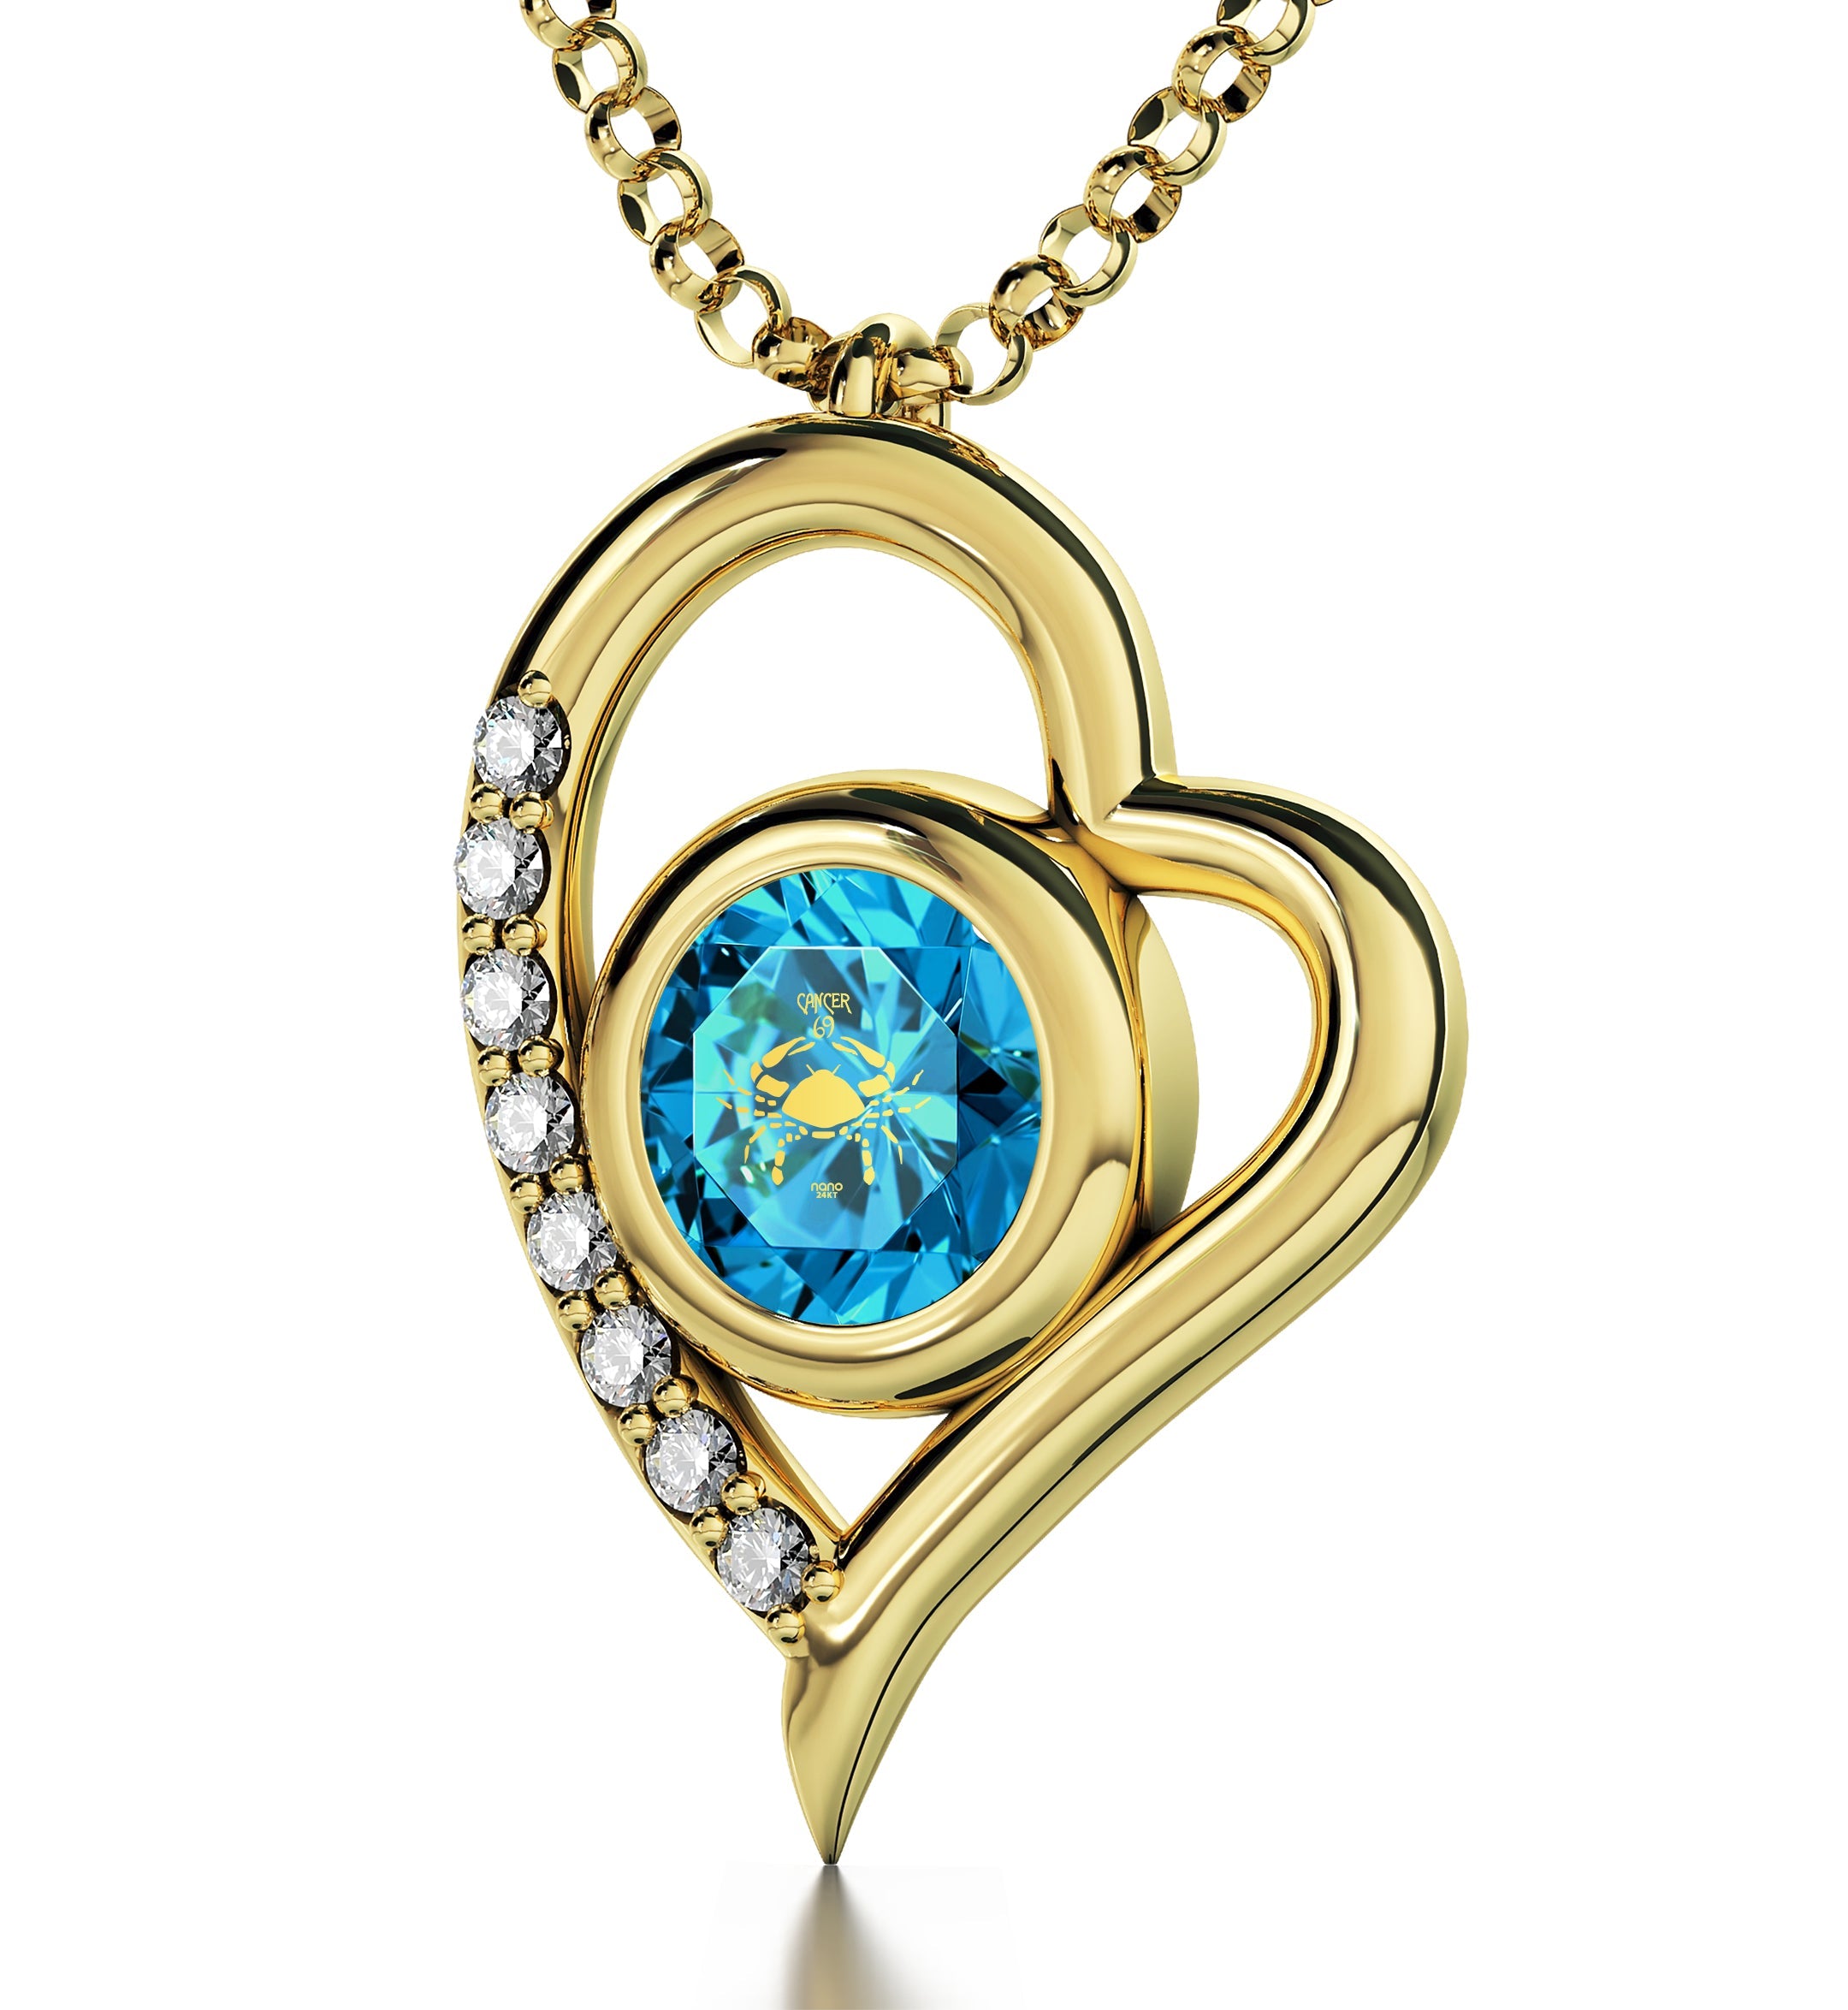 Gold Plated Silver Cancer Necklace Zodiac Heart Pendant featuring the cancer zodiac sign with Swarovski crystals on a chain, and a small branded tag.